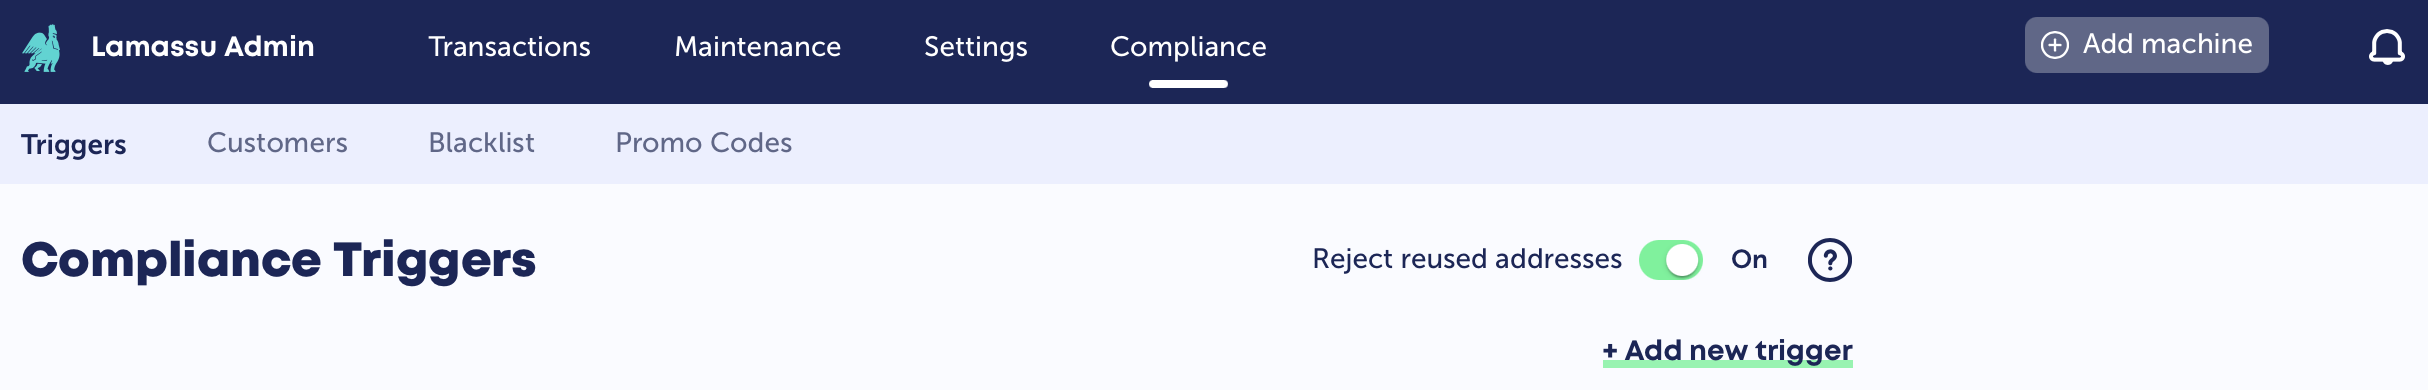 compliance_triggers.png